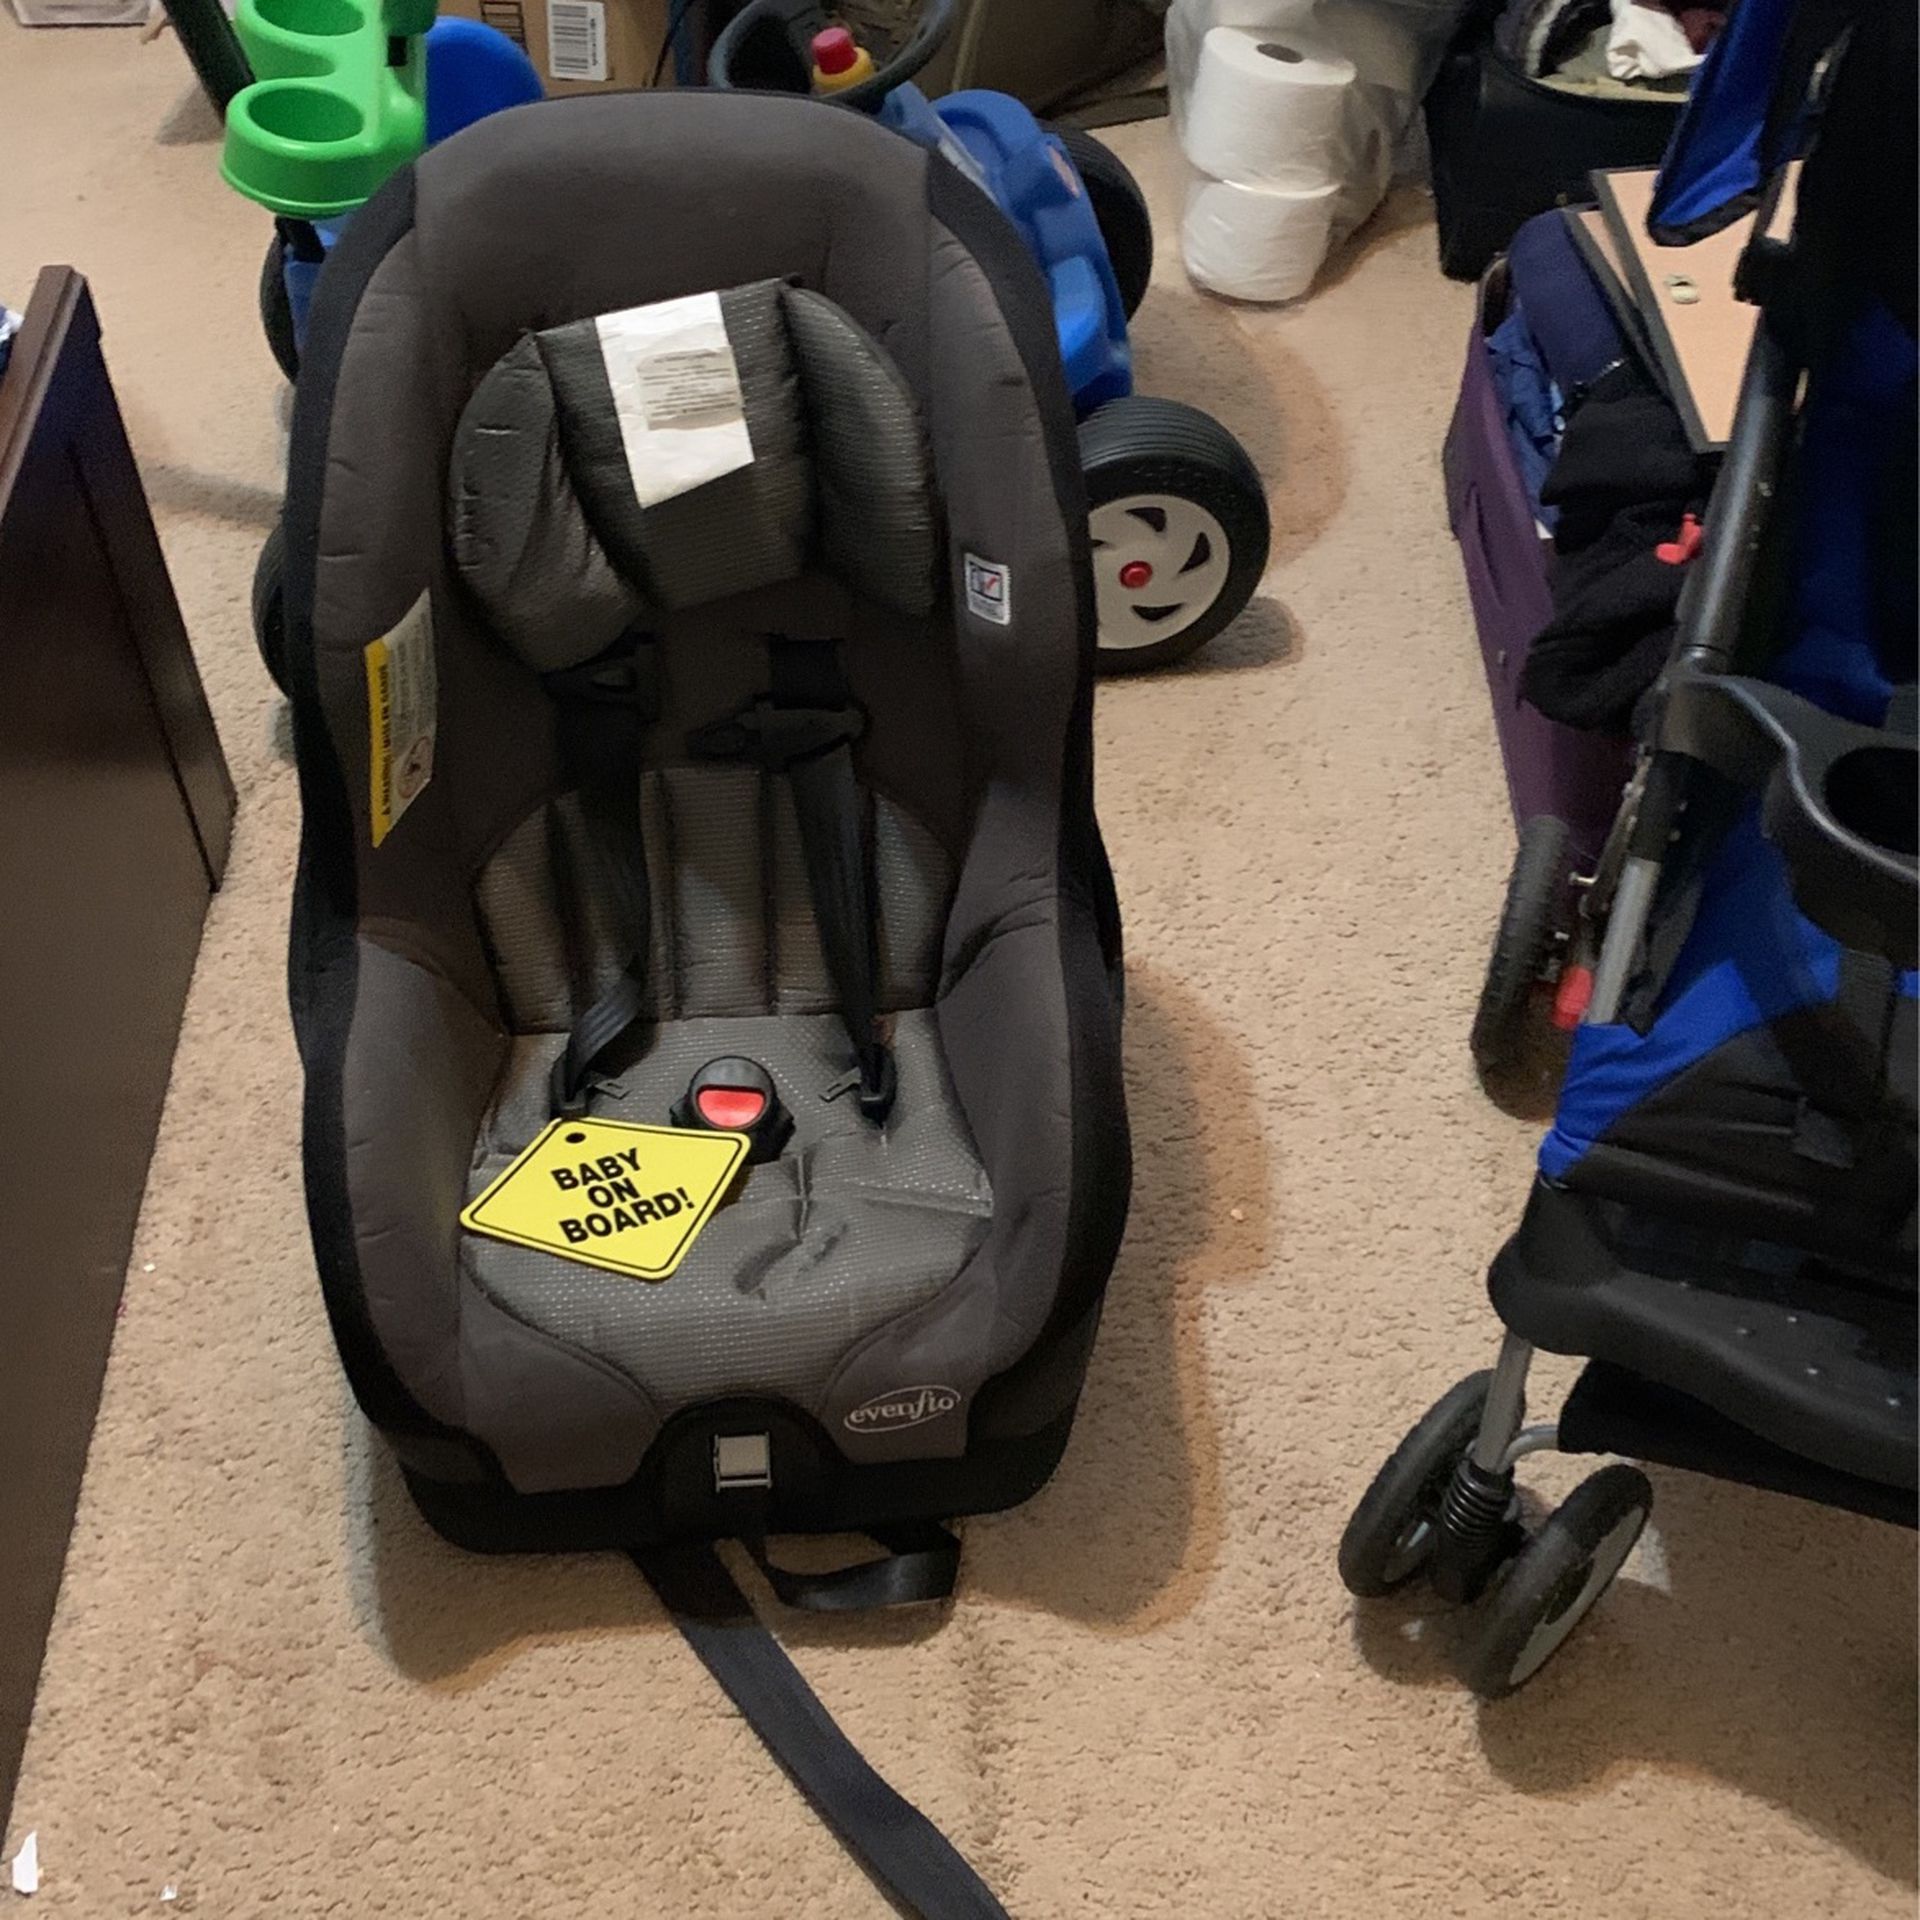 Moving Out Sale: Kid Car Seat Stroller Toy car Coffee Table, All For 20 Bucks